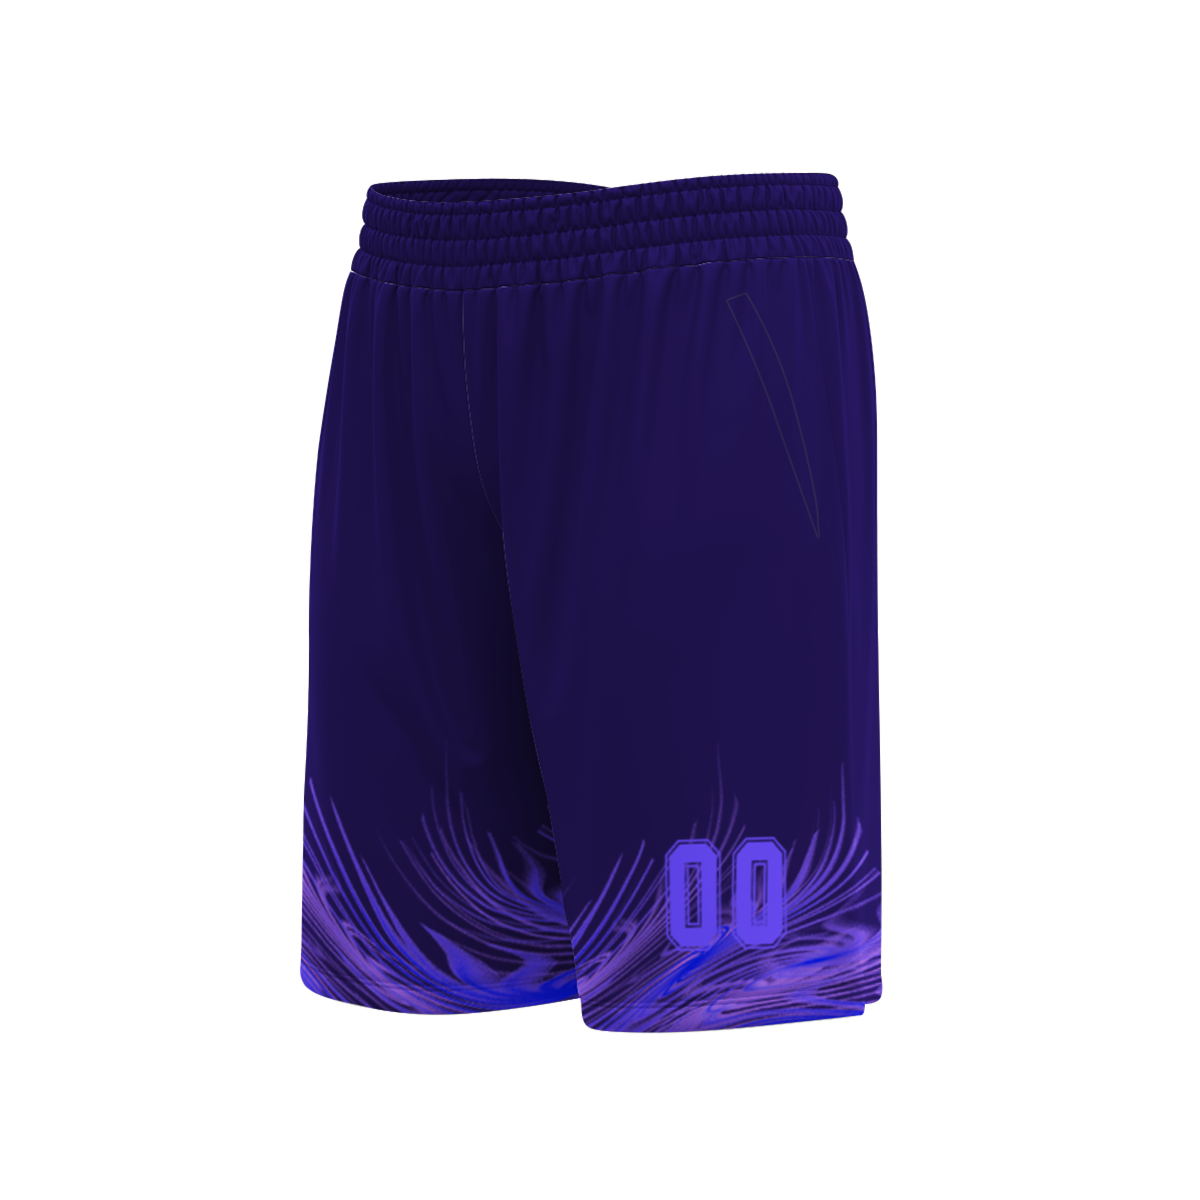 wholesale-polyester-breathable-sublimation-multiple-design-printed-basketball-jersey-uniforms-at-cj-pod-8